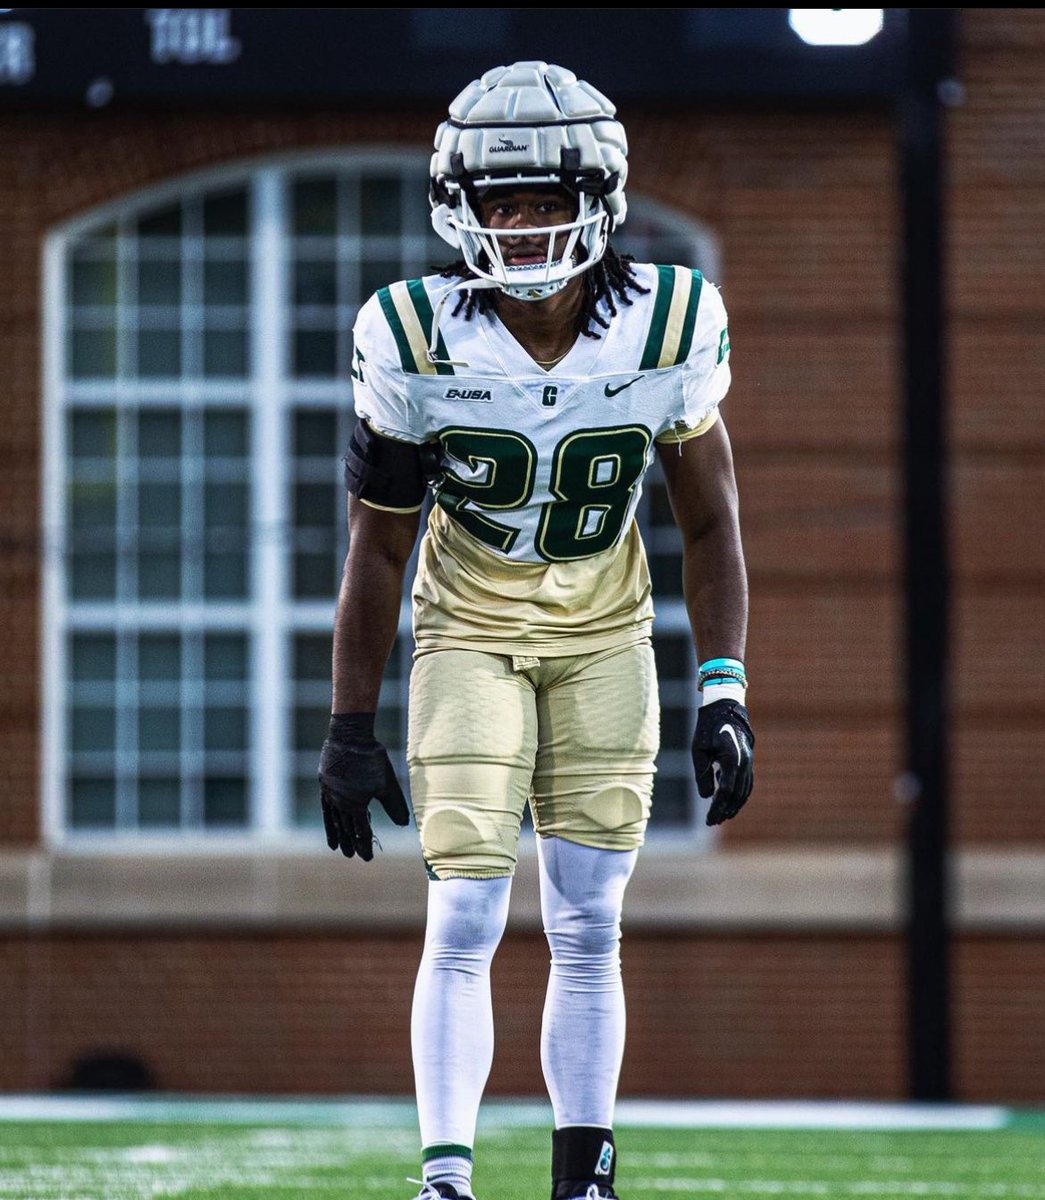 #AGTG UNC(Charlotte) re-offered ⛏️ @CharlotteFTBL